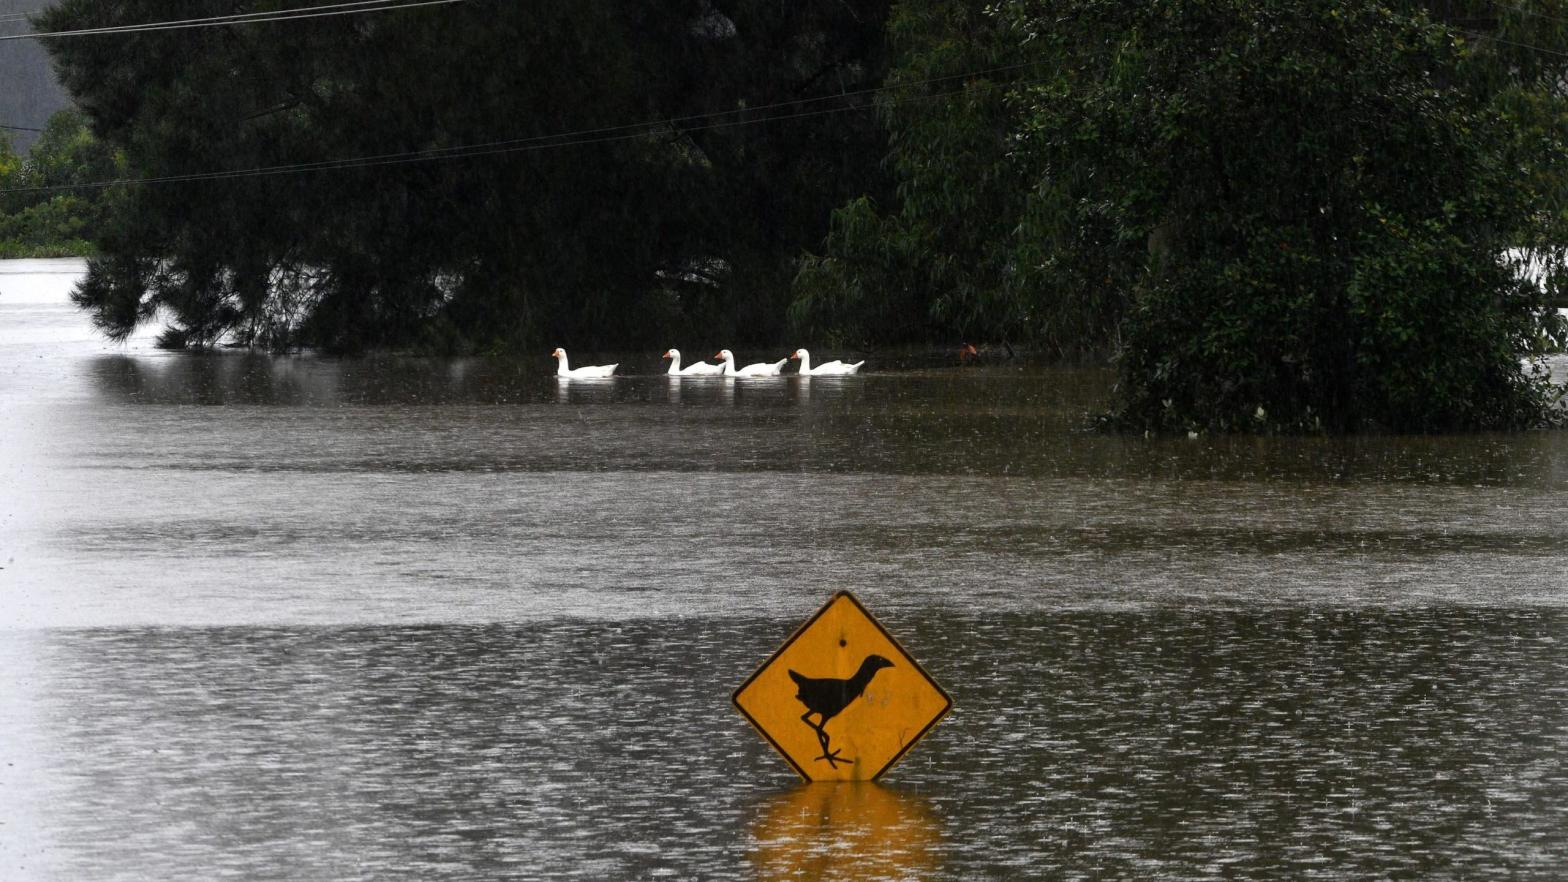 Ducks swim next to a submerged sign in floodwaters in Richmond suburb on March 22, 2021, as Sydney braced for its worst flooding in decades after record rainfall caused its largest dam to overflow and as deluges prompted mandatory mass evacuation orders along Australia's east coast.  (Photo: Saeed Khan, Getty Images)